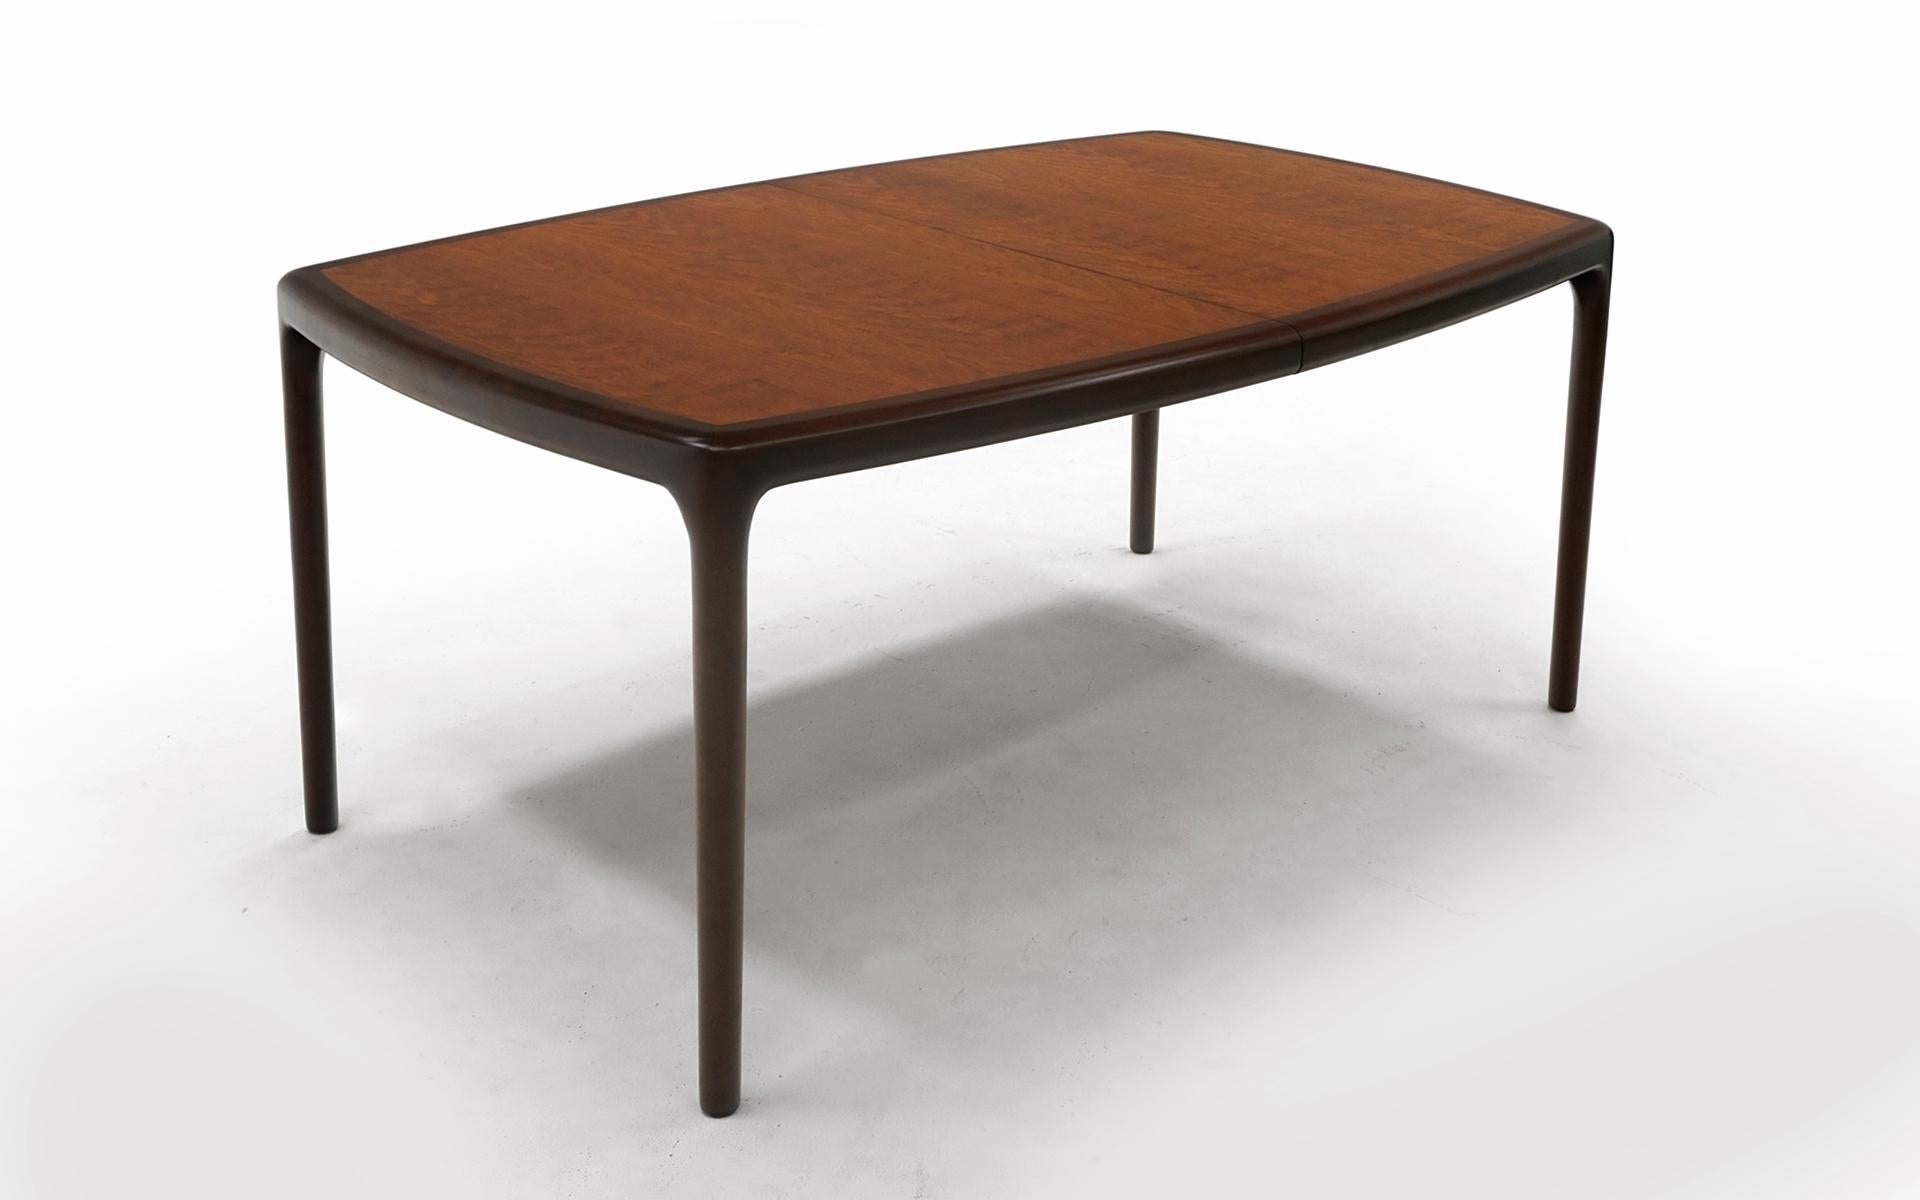 Edward Wormley for Dunbar dining table in Cherry and Mahogany. Expertly refinished. The condition is as close to perfect as it can get. Leaves are 18 inches wide. Table is 66 inches wide without leaves.